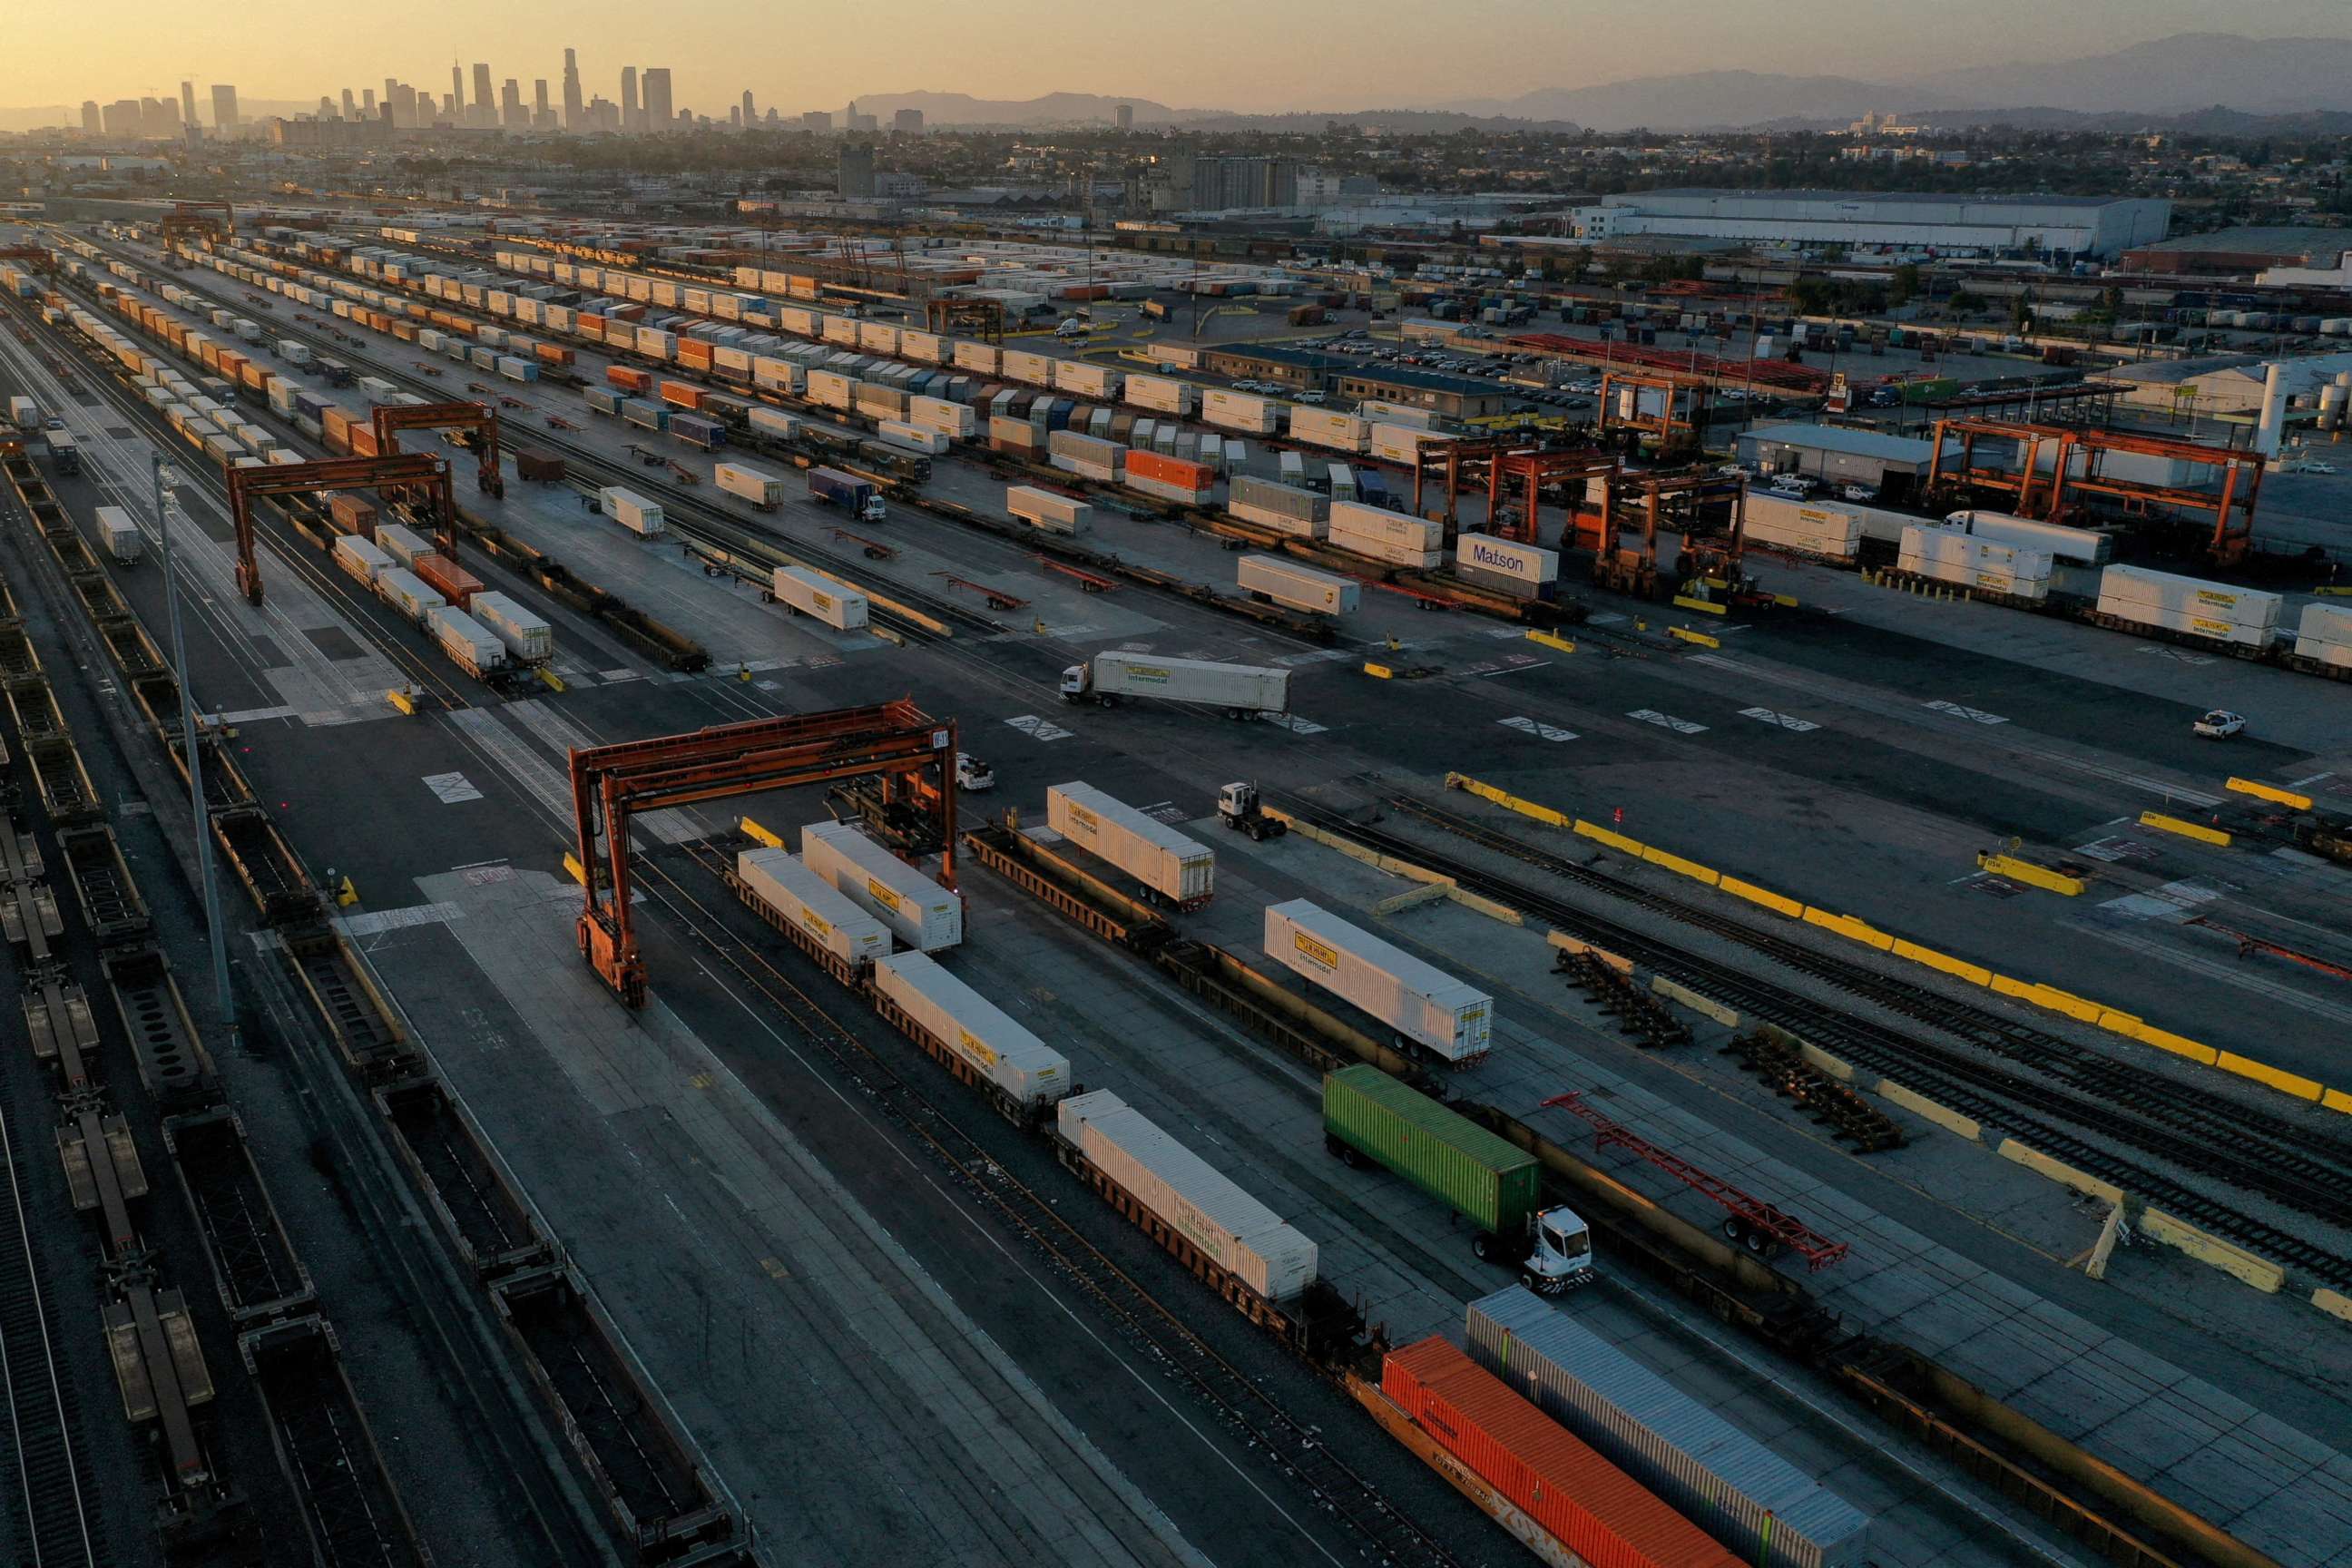 PHOTO: A view of gantry cranes, shipping containers and freight railway trains ahead of a possible strike if there is no deal with the rail worker unions, at the Union Pacific Los Angeles Intermodal Facility rail yard in Commerce, Calif., Sept. 15, 2022.